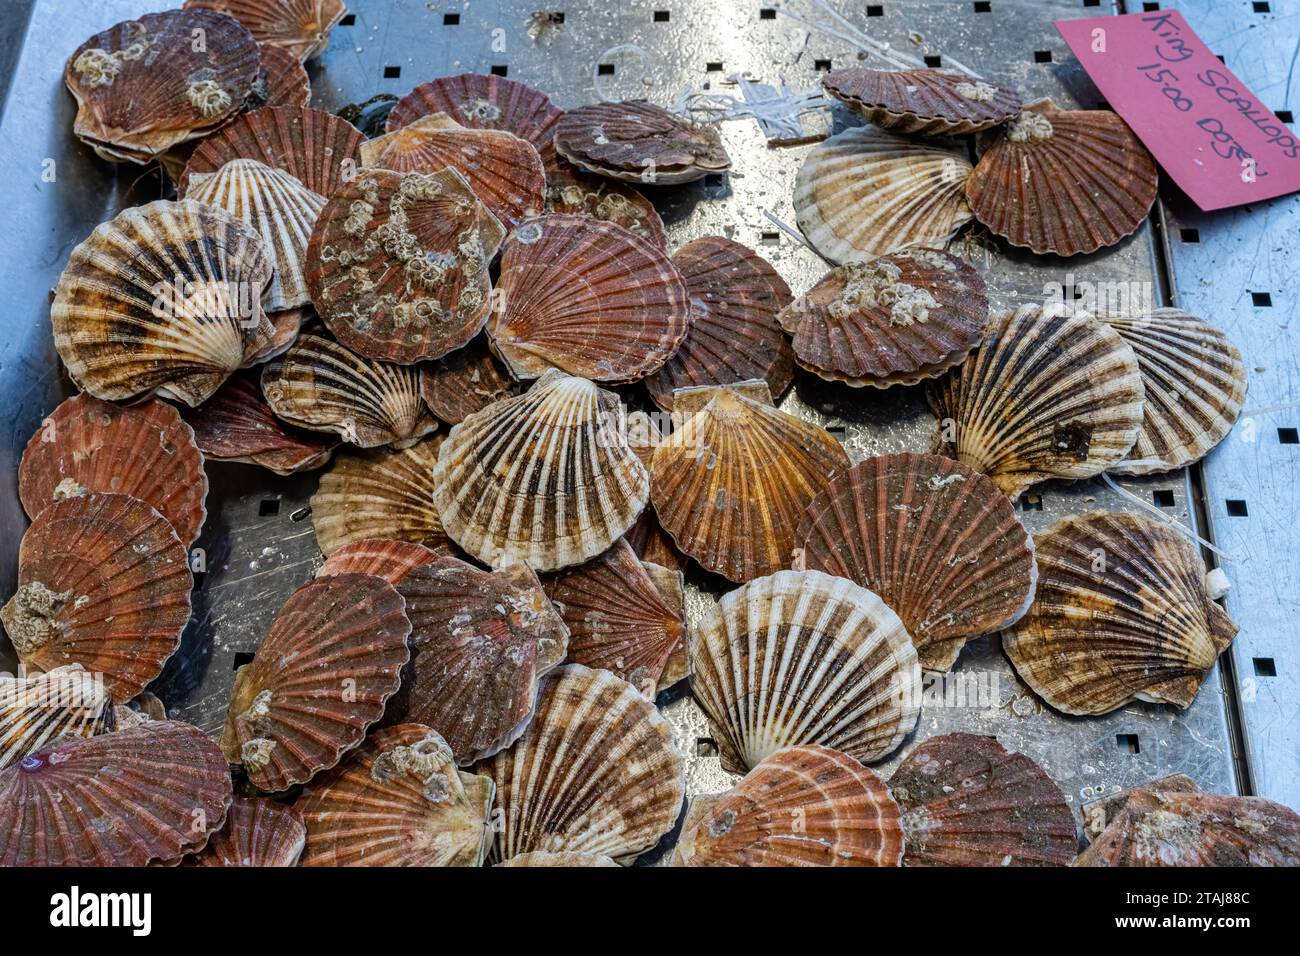 King scallops for sale at a market in Belfast, Northern Ireland Stock Photo